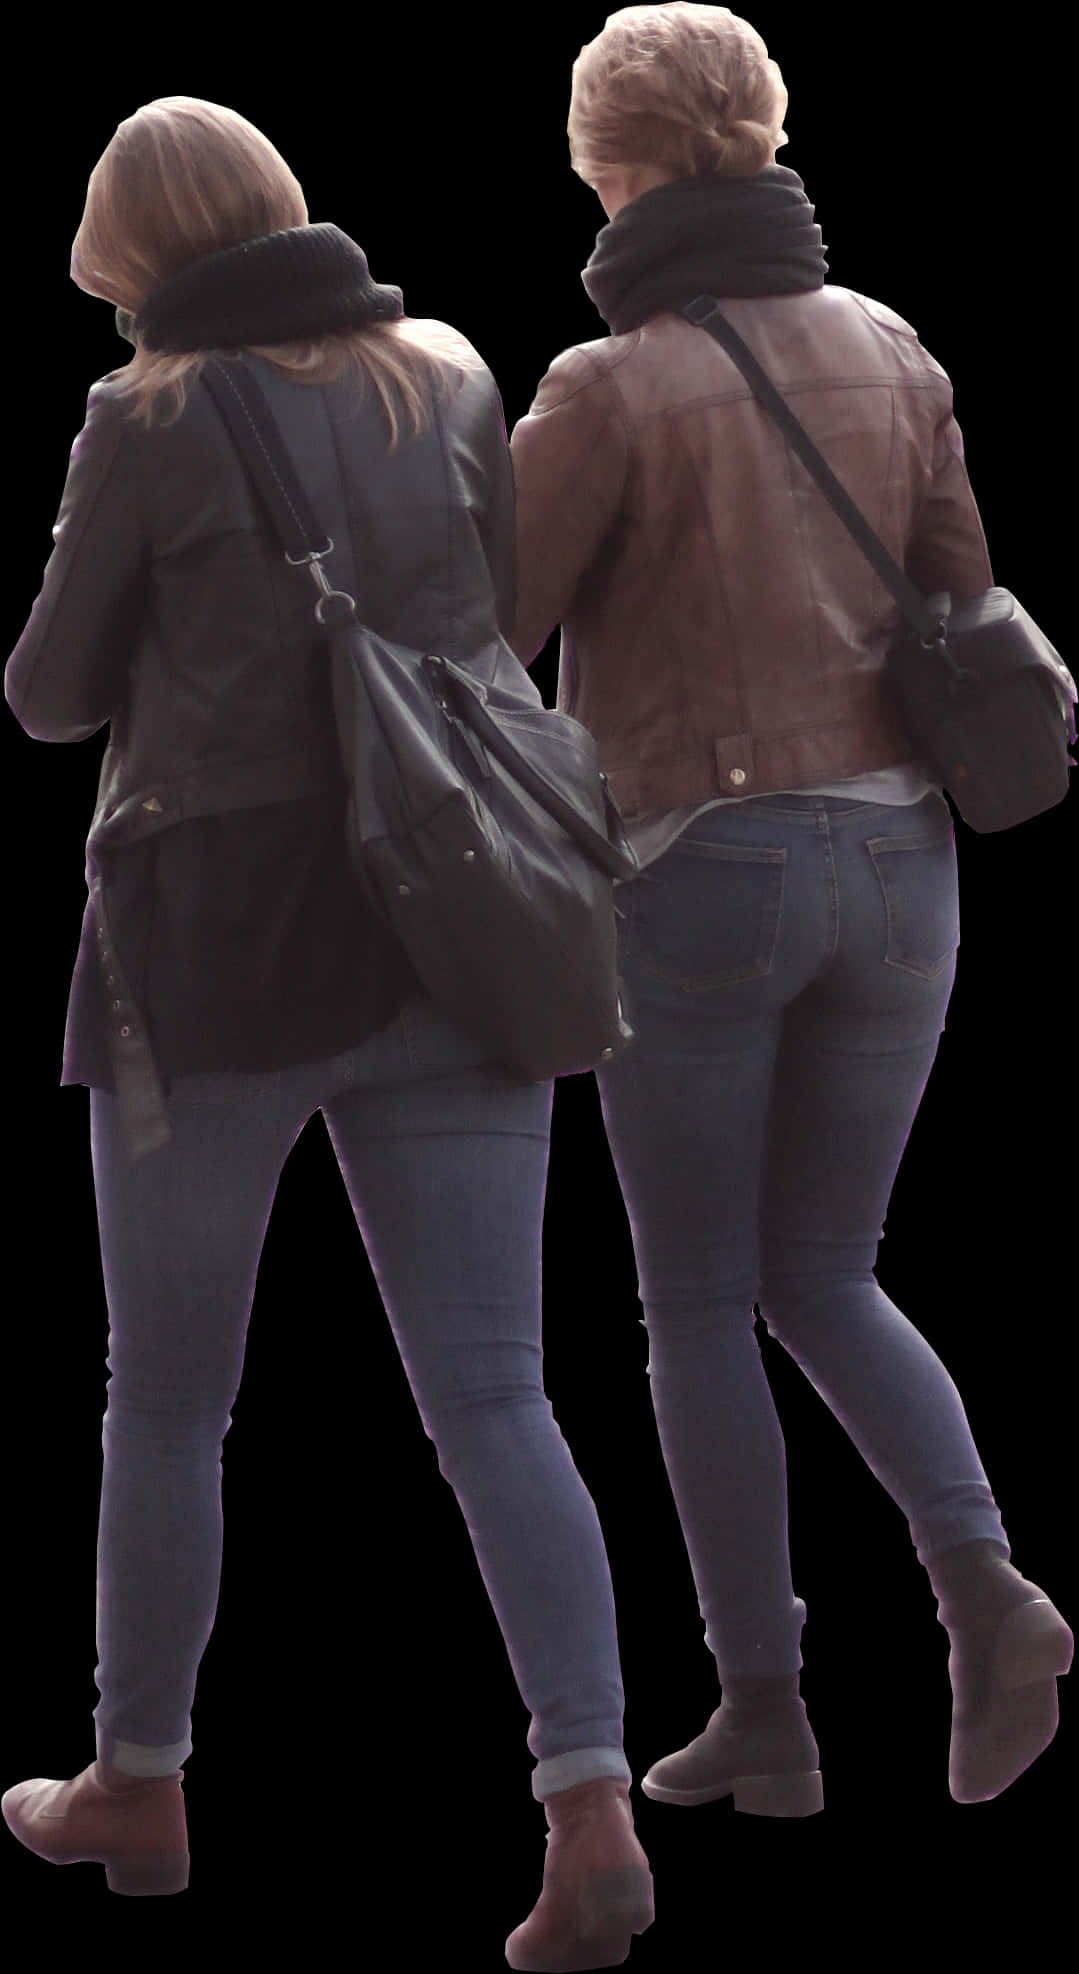 Two Women Standing Together With Their Hands On Their Hips